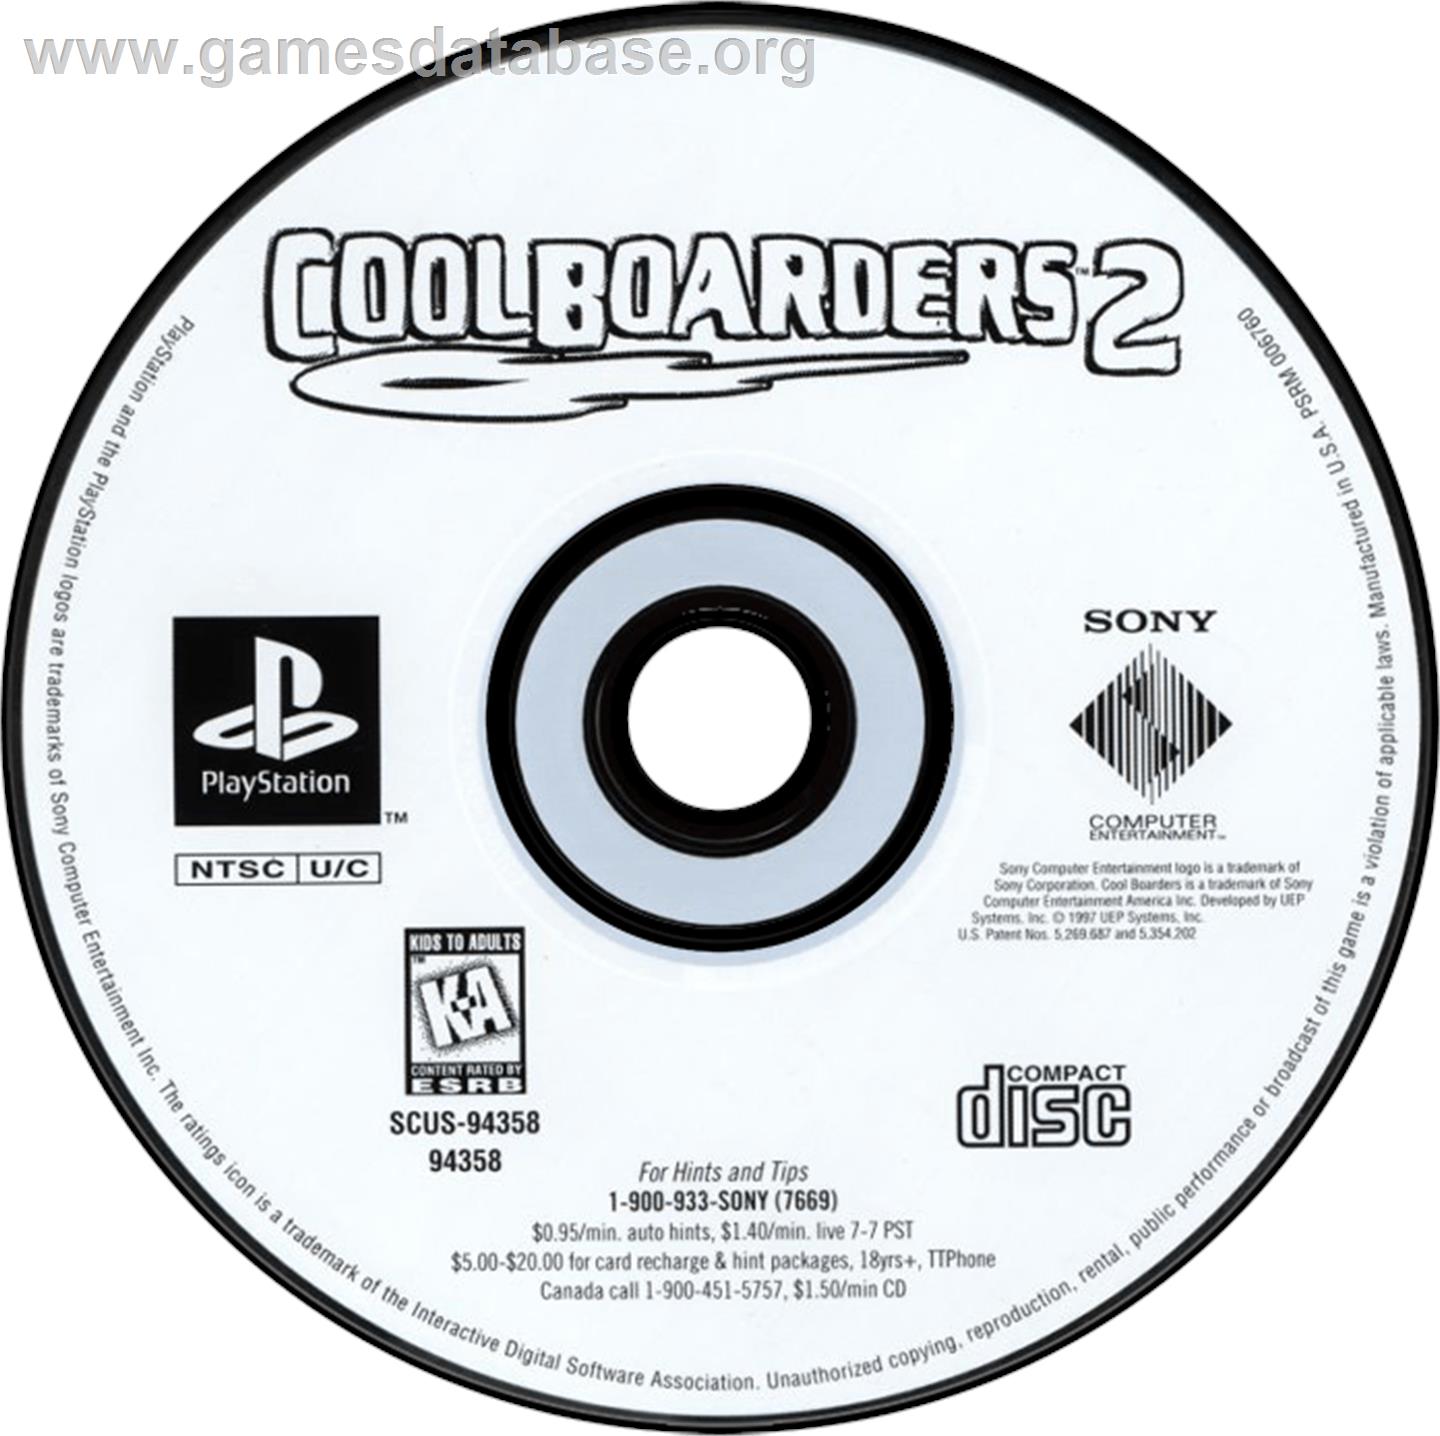 Cool Boarders 2 - Sony Playstation - Artwork - Disc